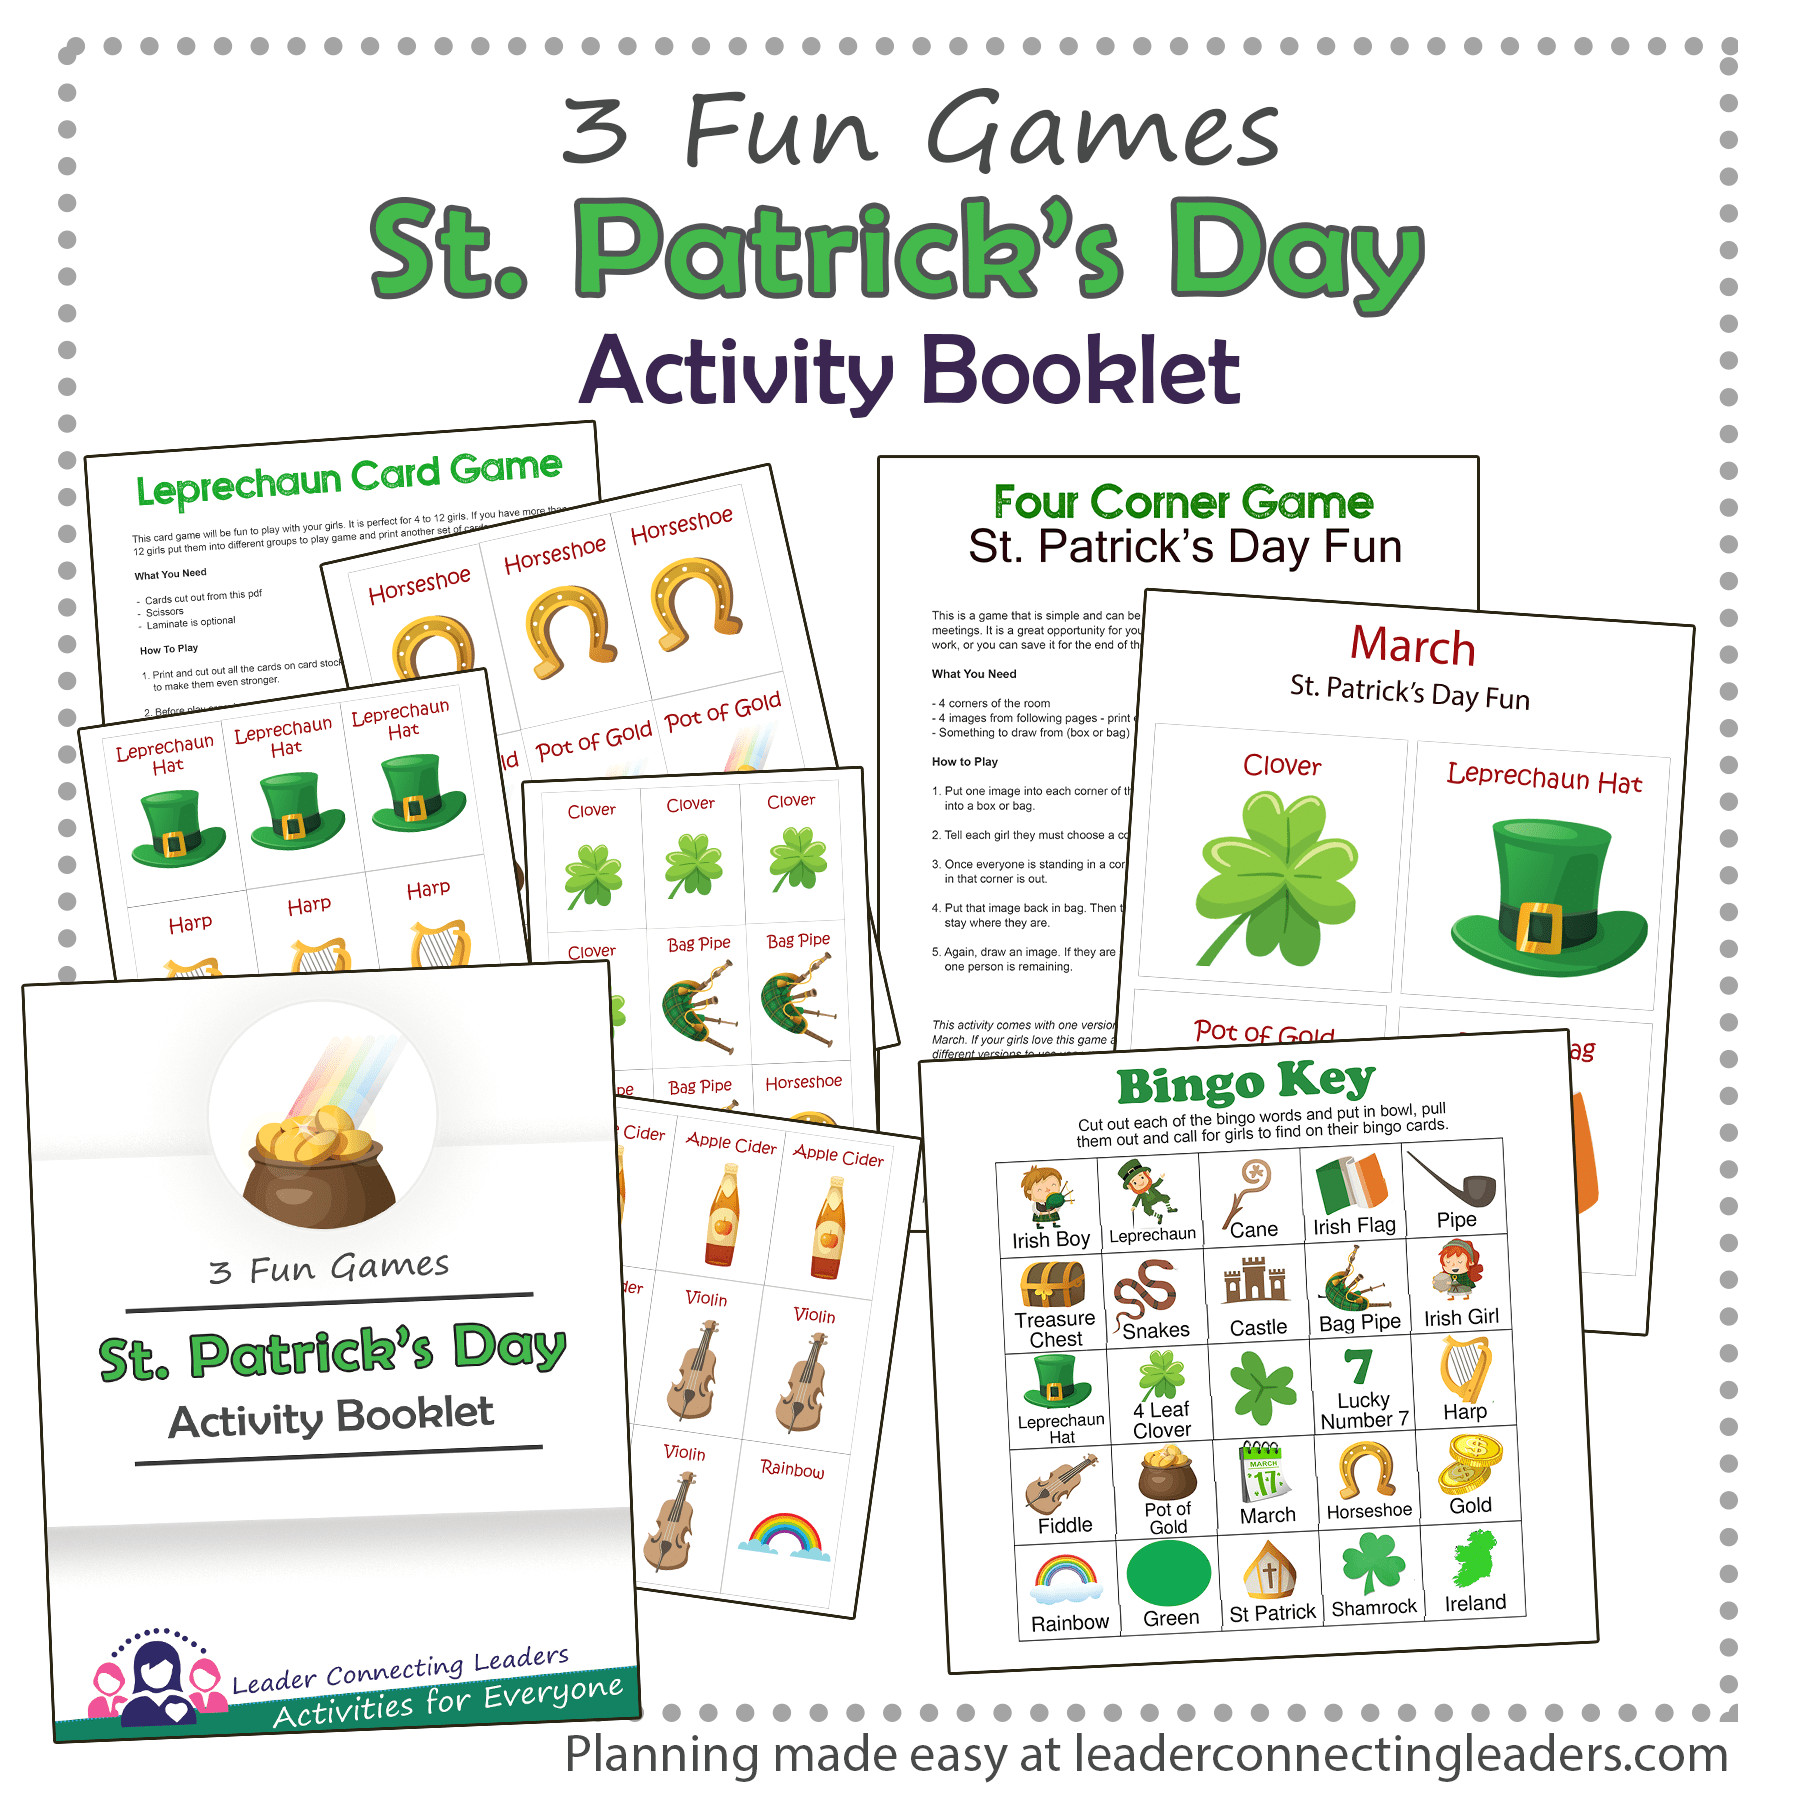 Girl Scout Juniors Drawing Badge Requirements Pdf 4 Fun Activities to Earn the Junior Scribe Badge Activity